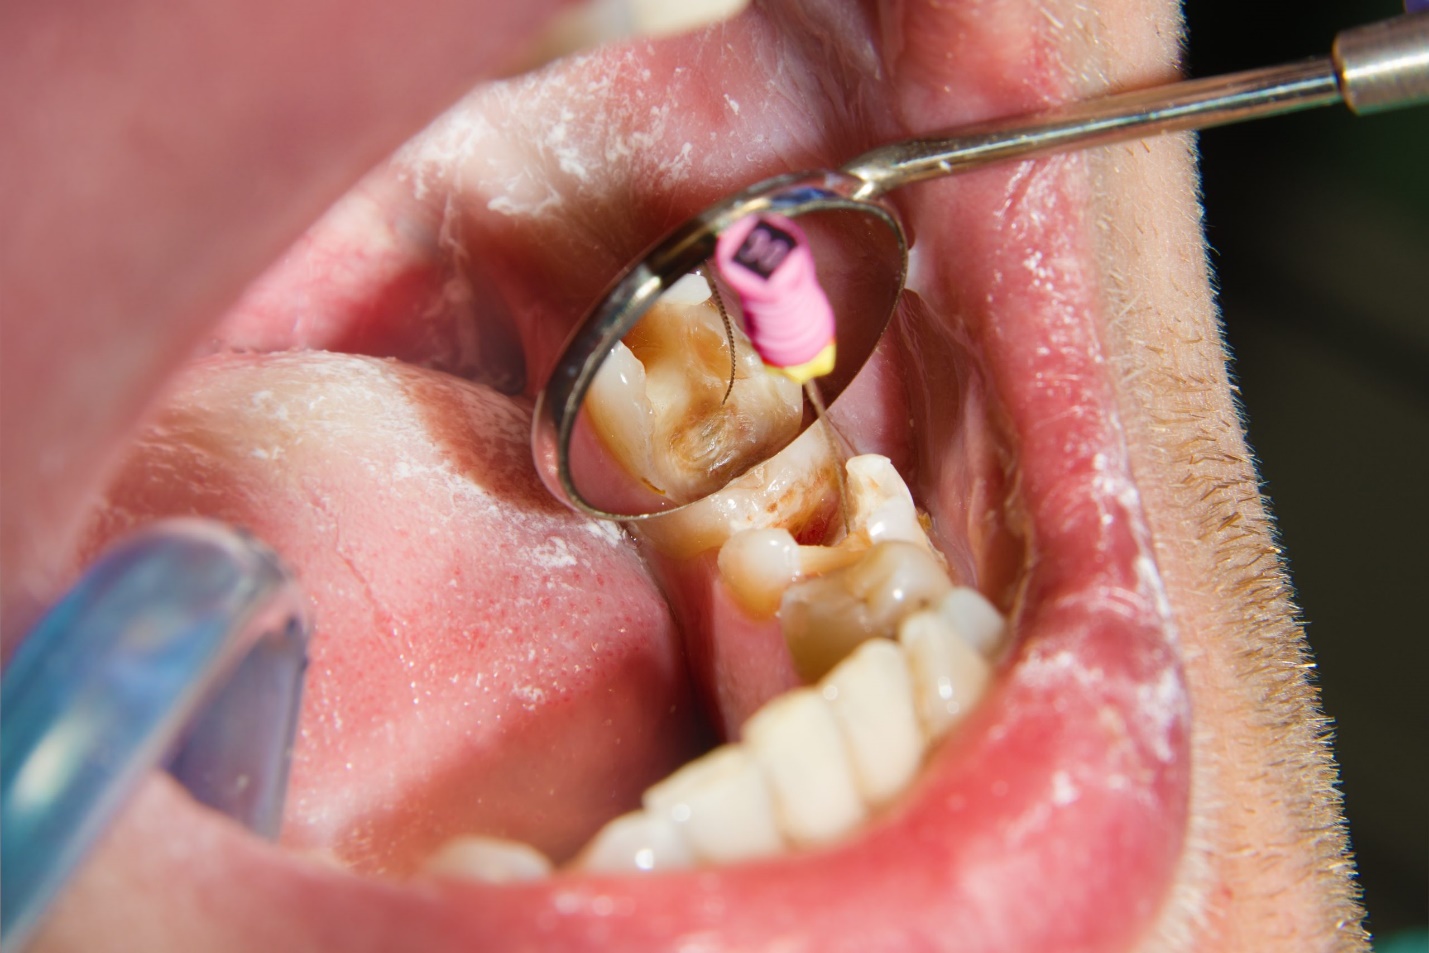 Is an Emergency Dentist Qualified to Perform a Root Canal Treatment?